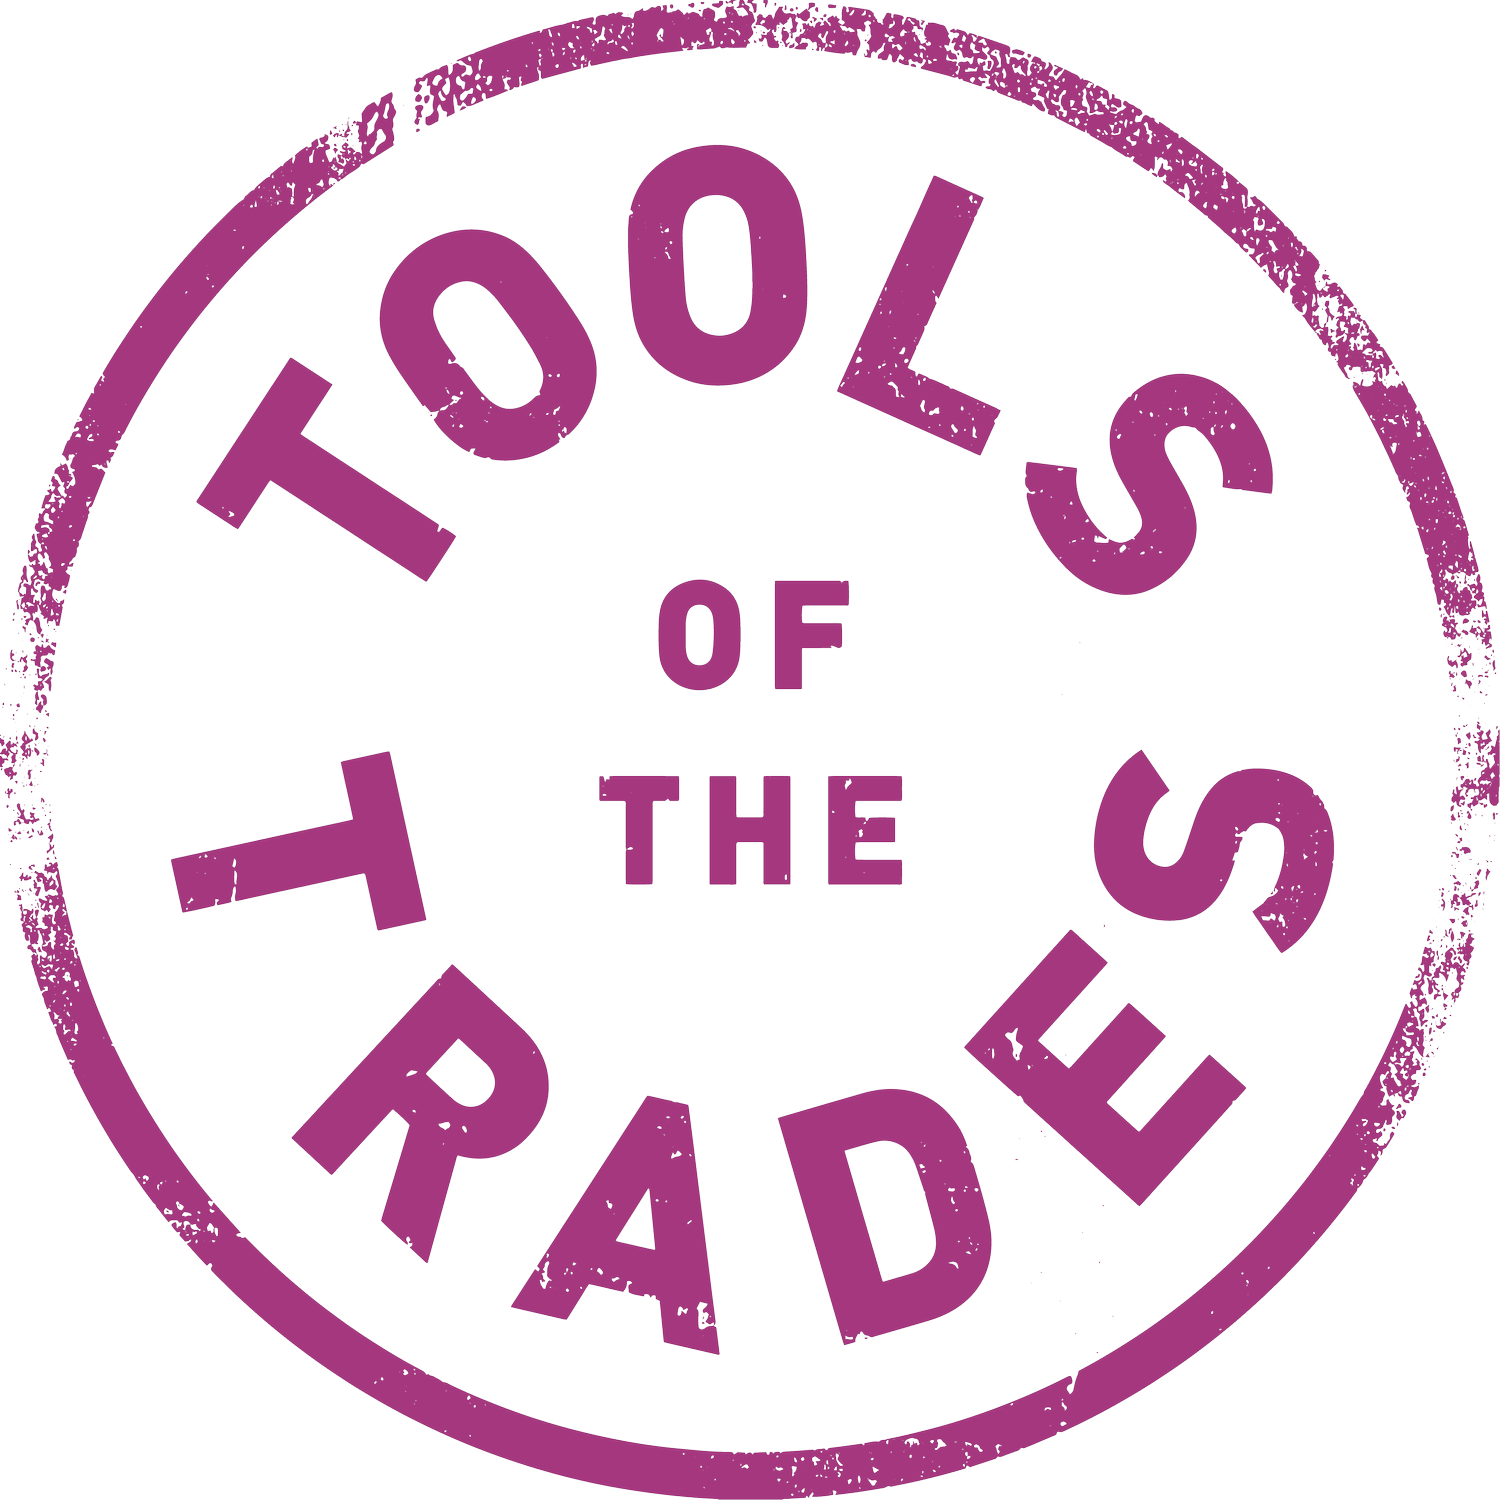 Tools of the Trades